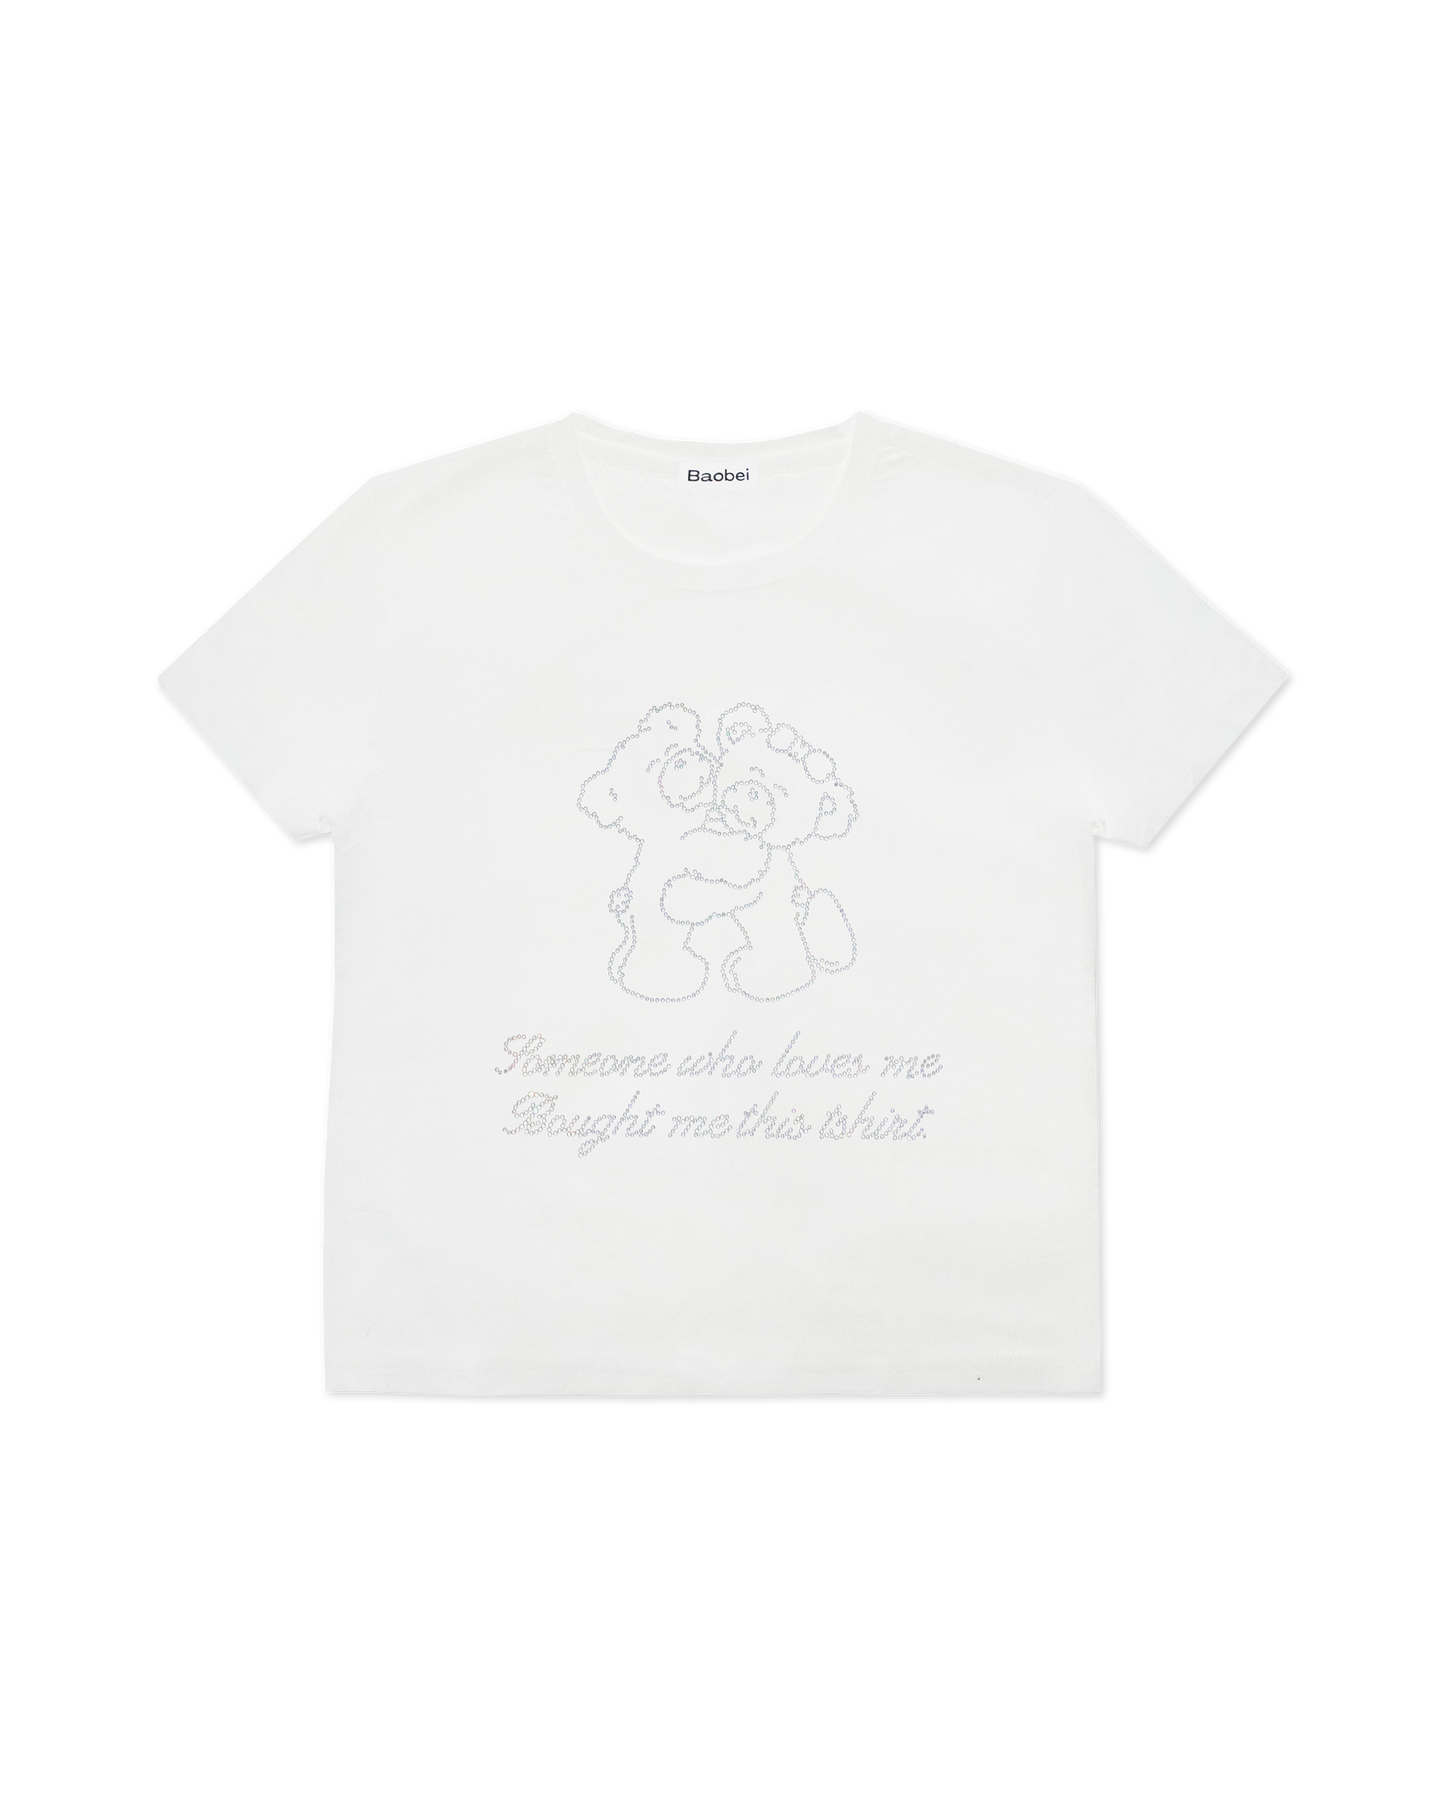 white tee shirt with rhinestone writing 'someone who loves me bought me this tshirt' and two bears hugging | Teddy Tee in White | Baobei Label